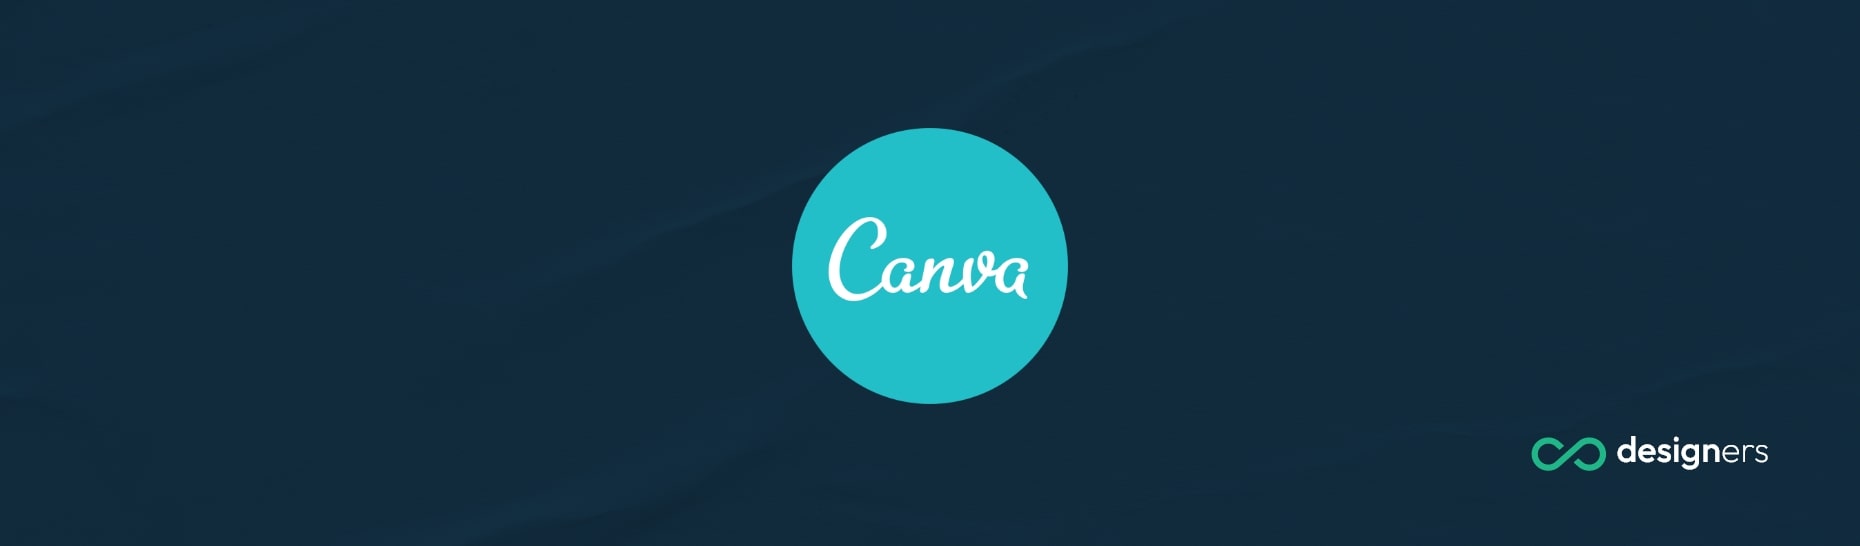 What Size Is a Canva Infographic?